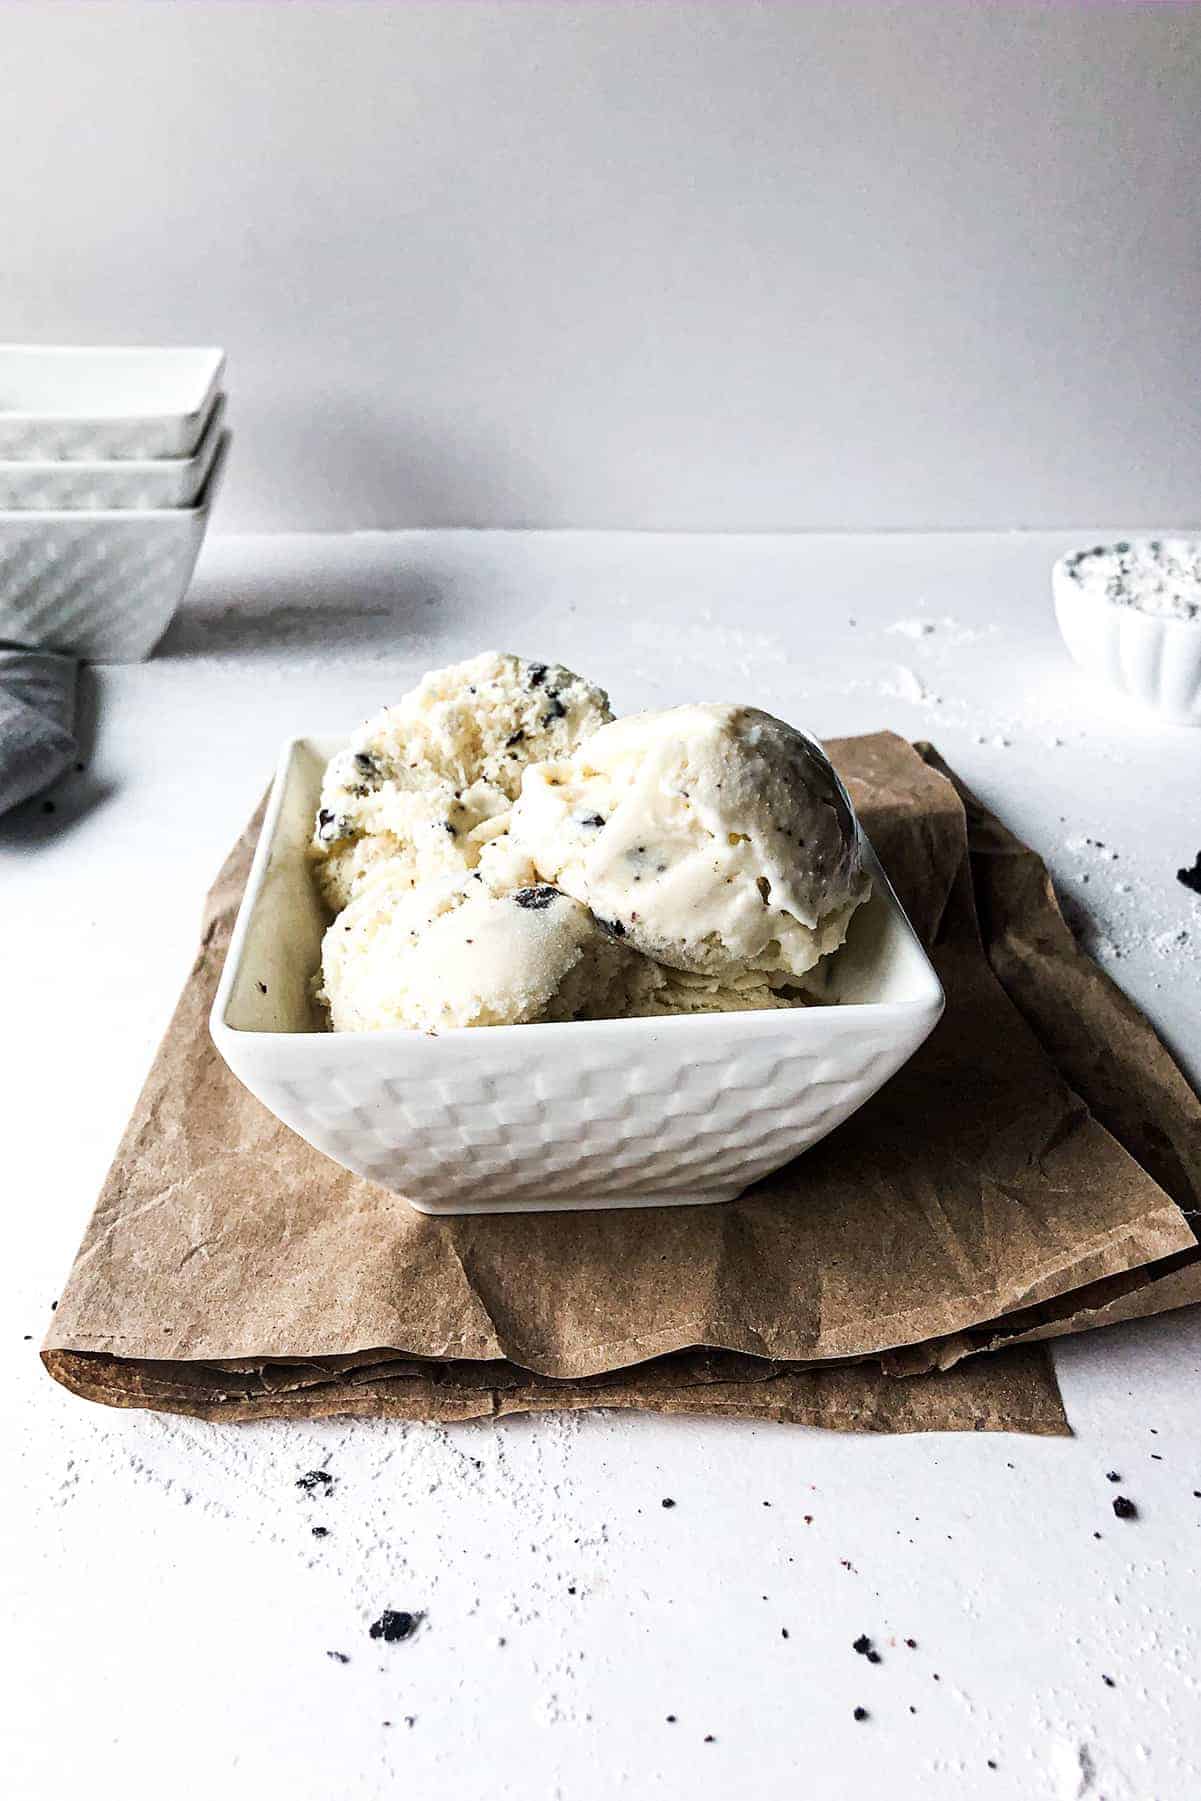 mint chocolate chip ice cream from the side